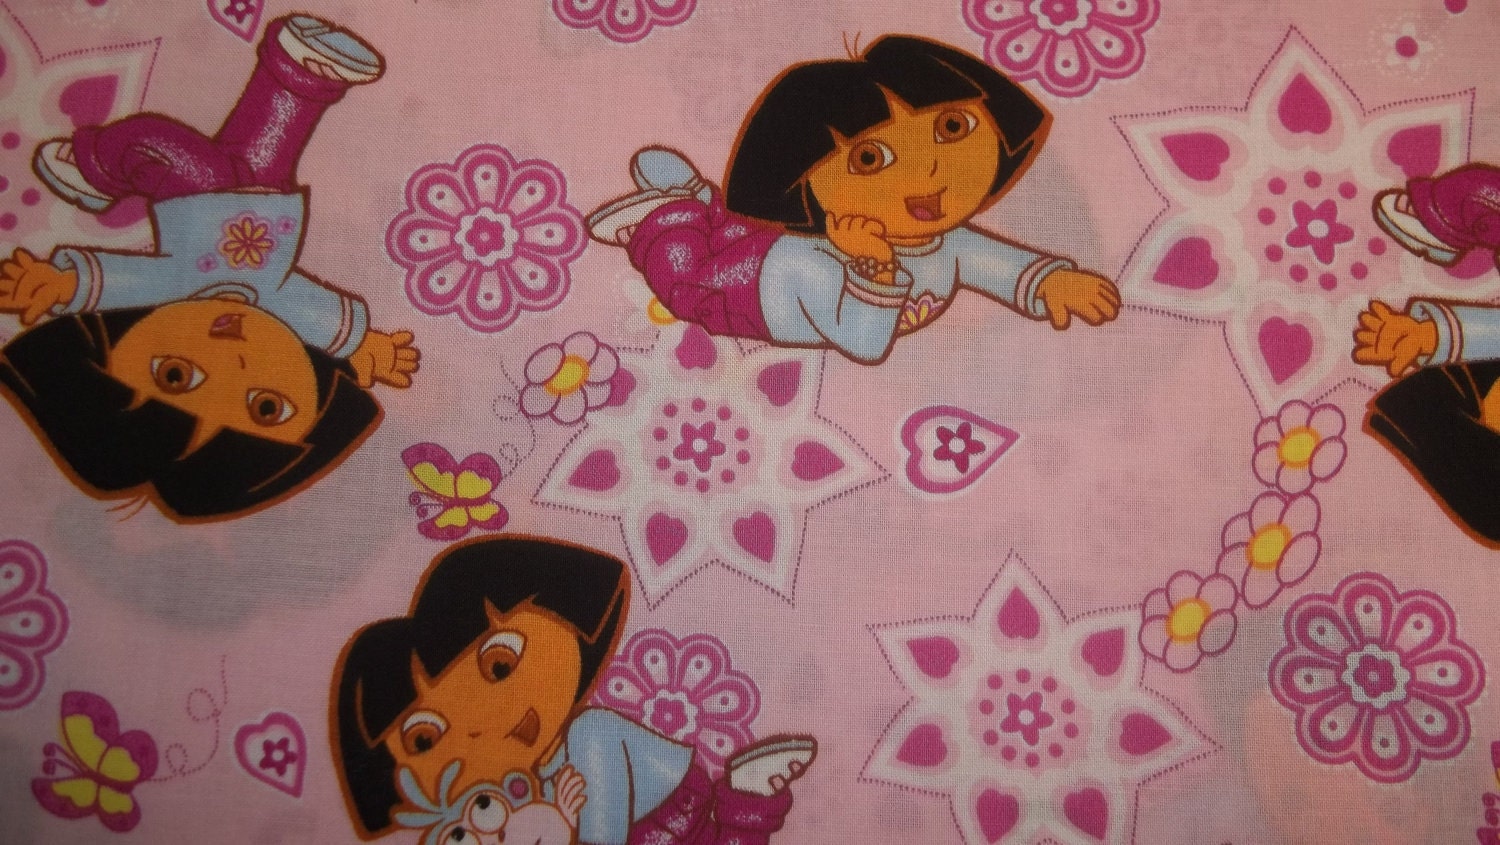 Dora The Explorer with stars on pink back by redbrickquilting